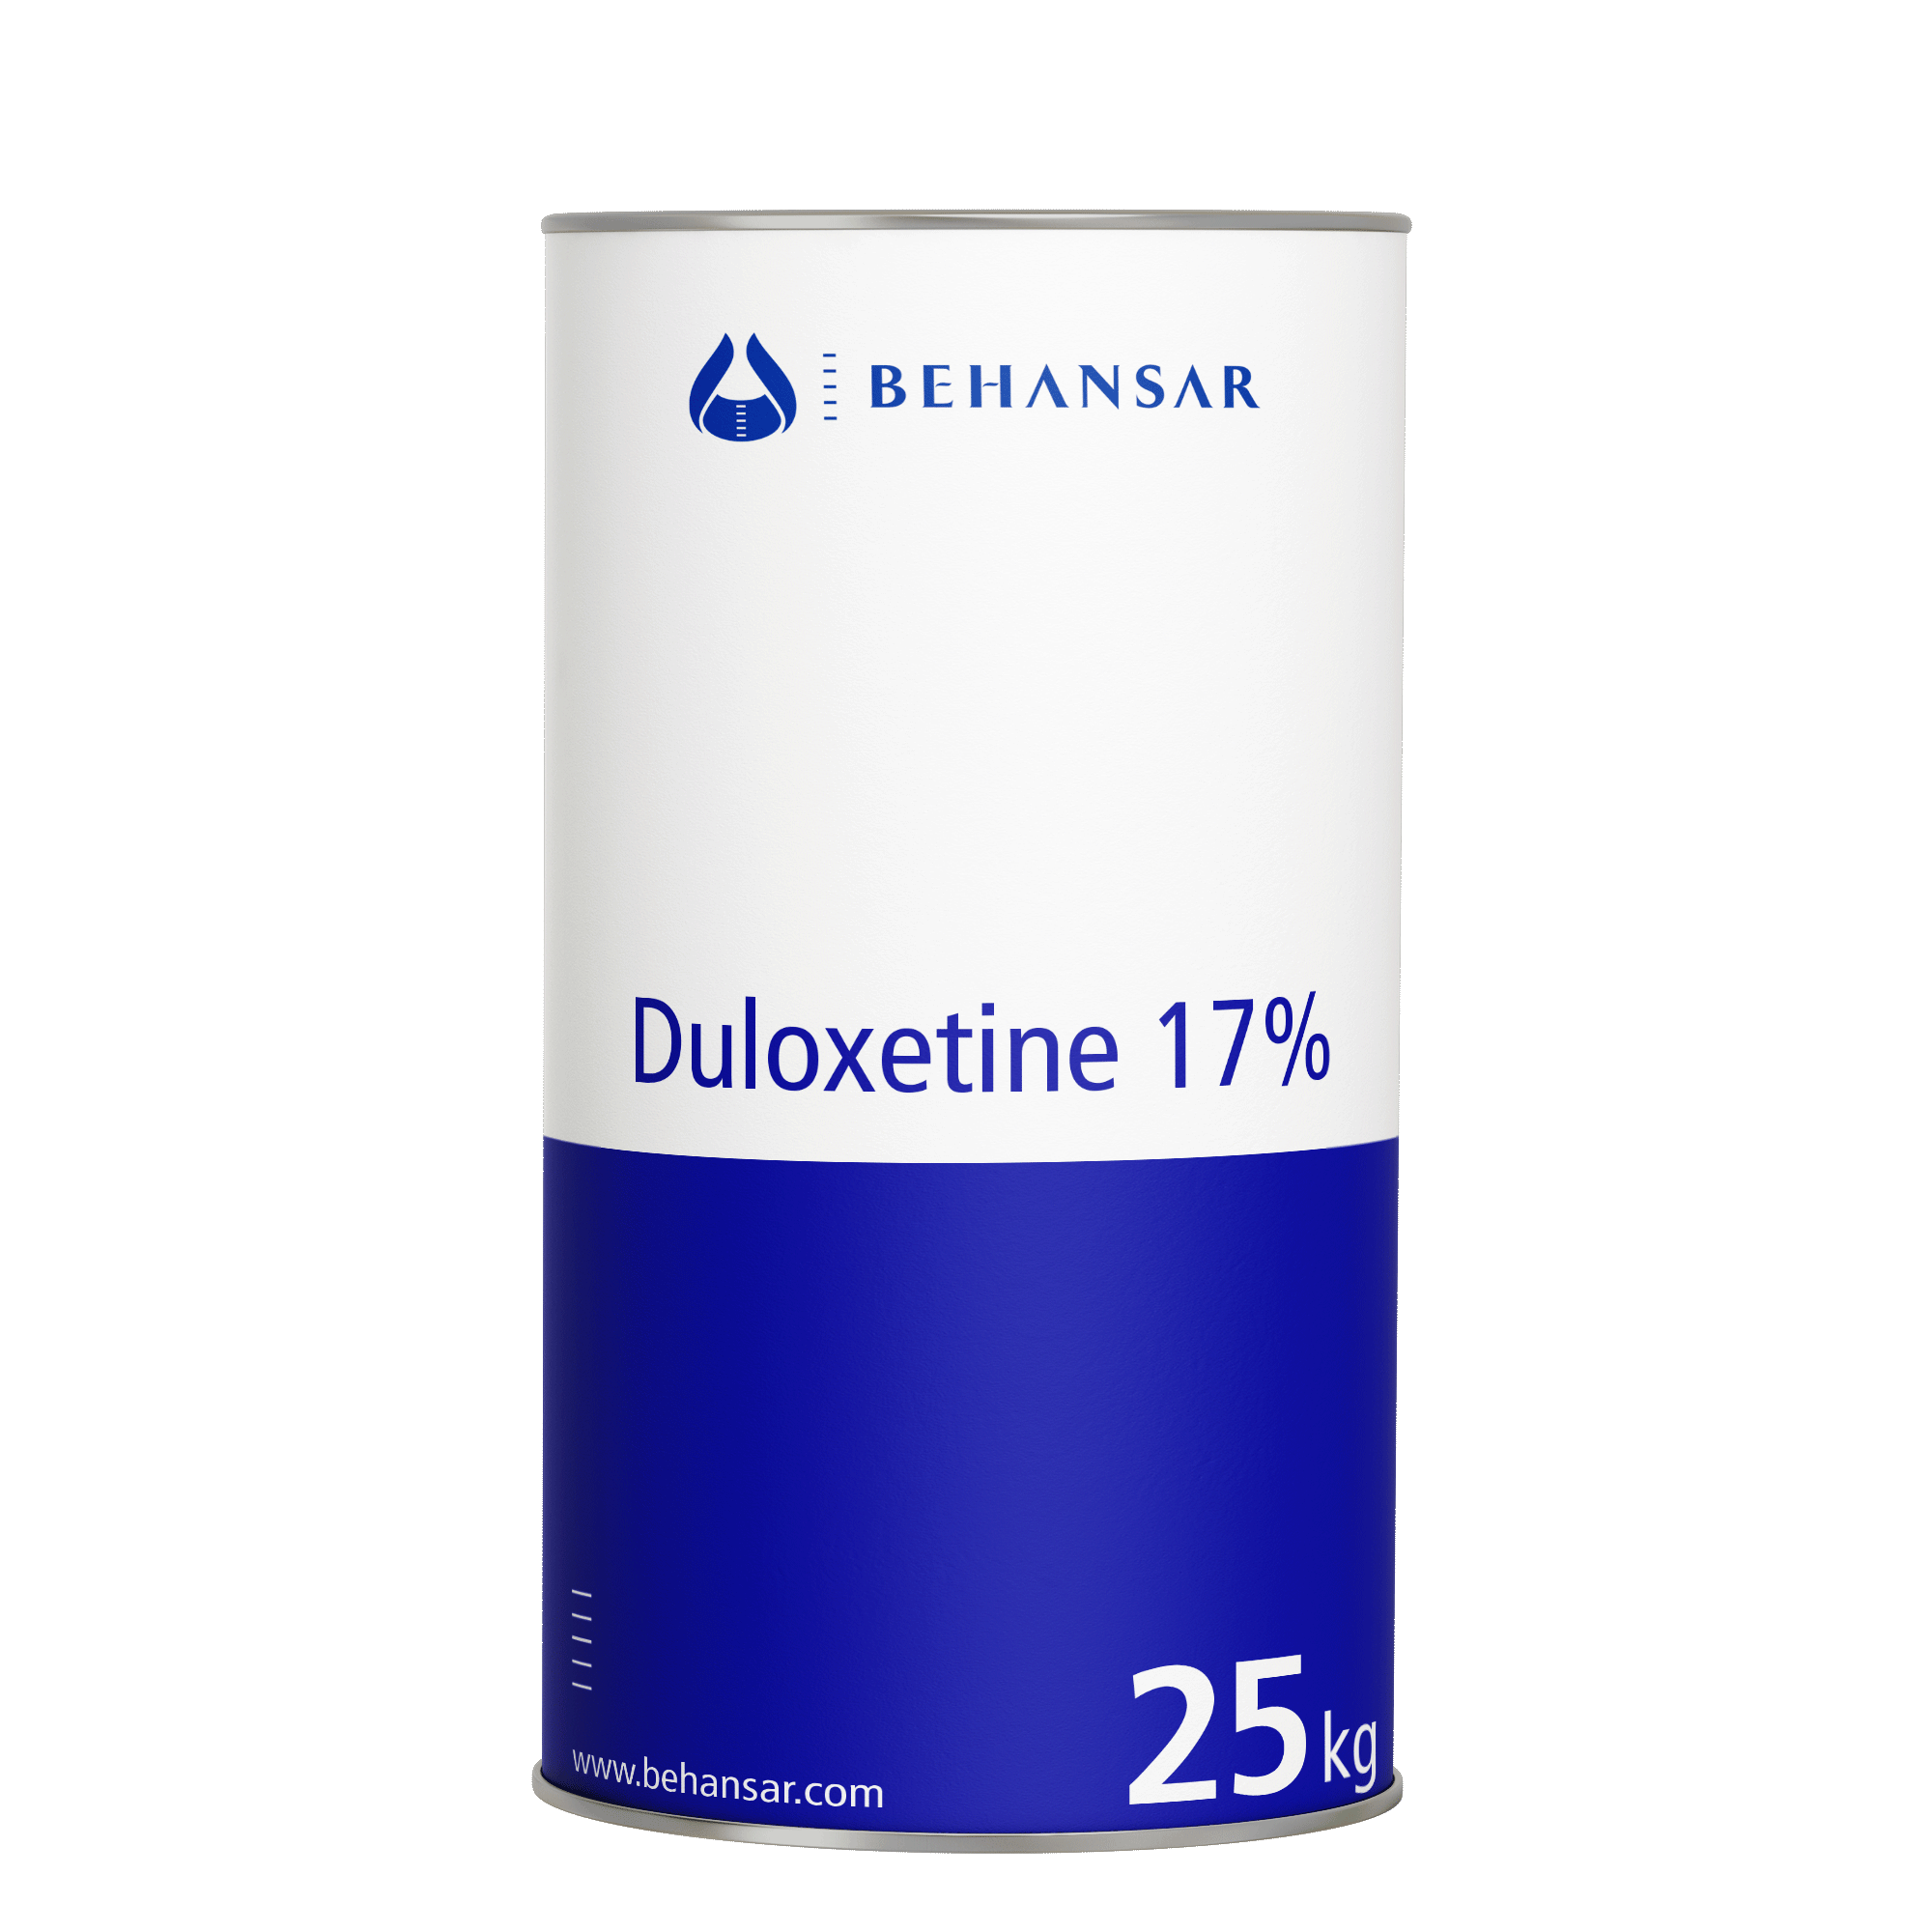 Duloxetine 17% is one of the products of Behansar Co